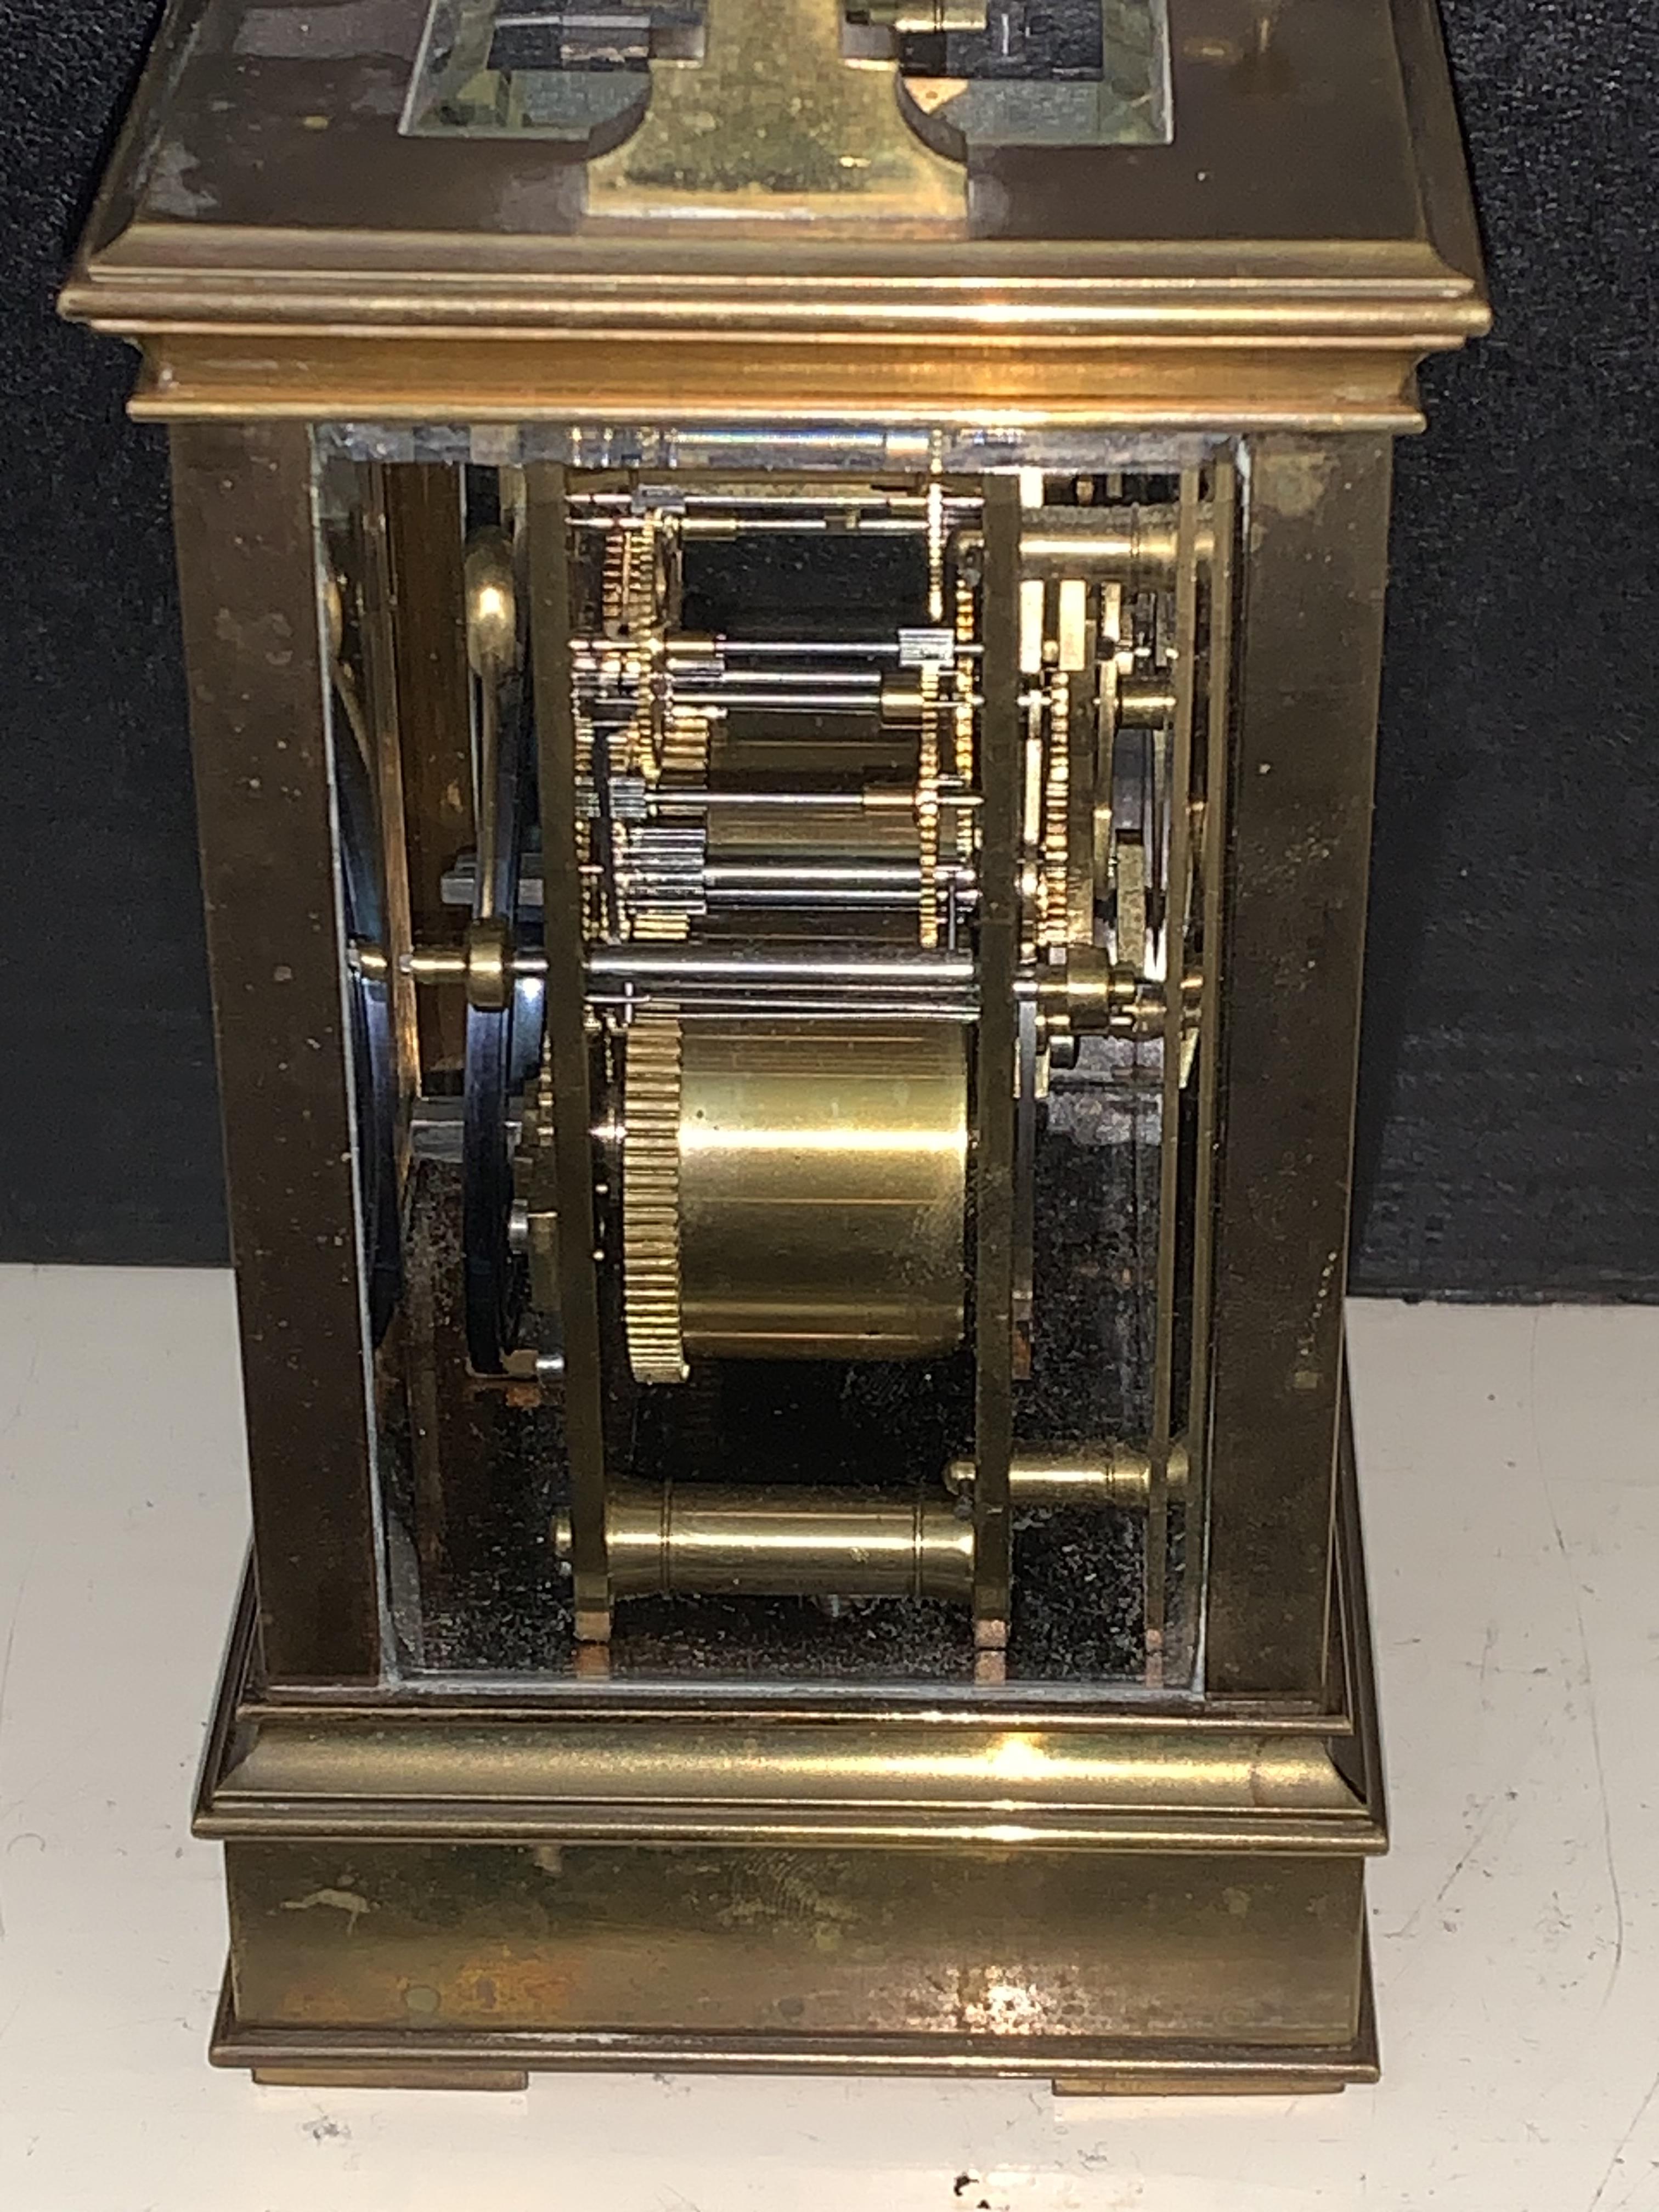 Penlington & Hutton Superb Brass Heavy Repeating Carriage Clock, with visible open platform - Image 2 of 3